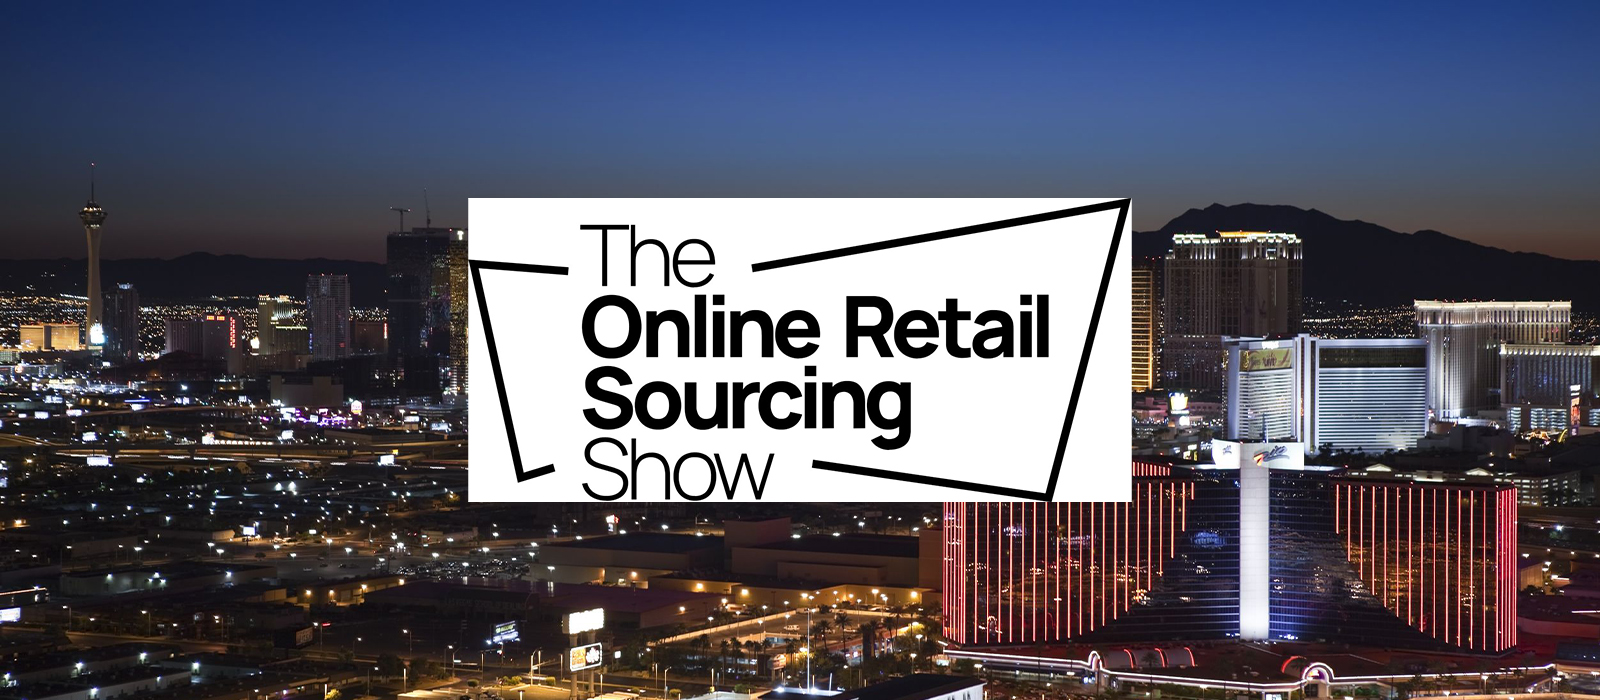 The Online Retail Sourscing Show banner